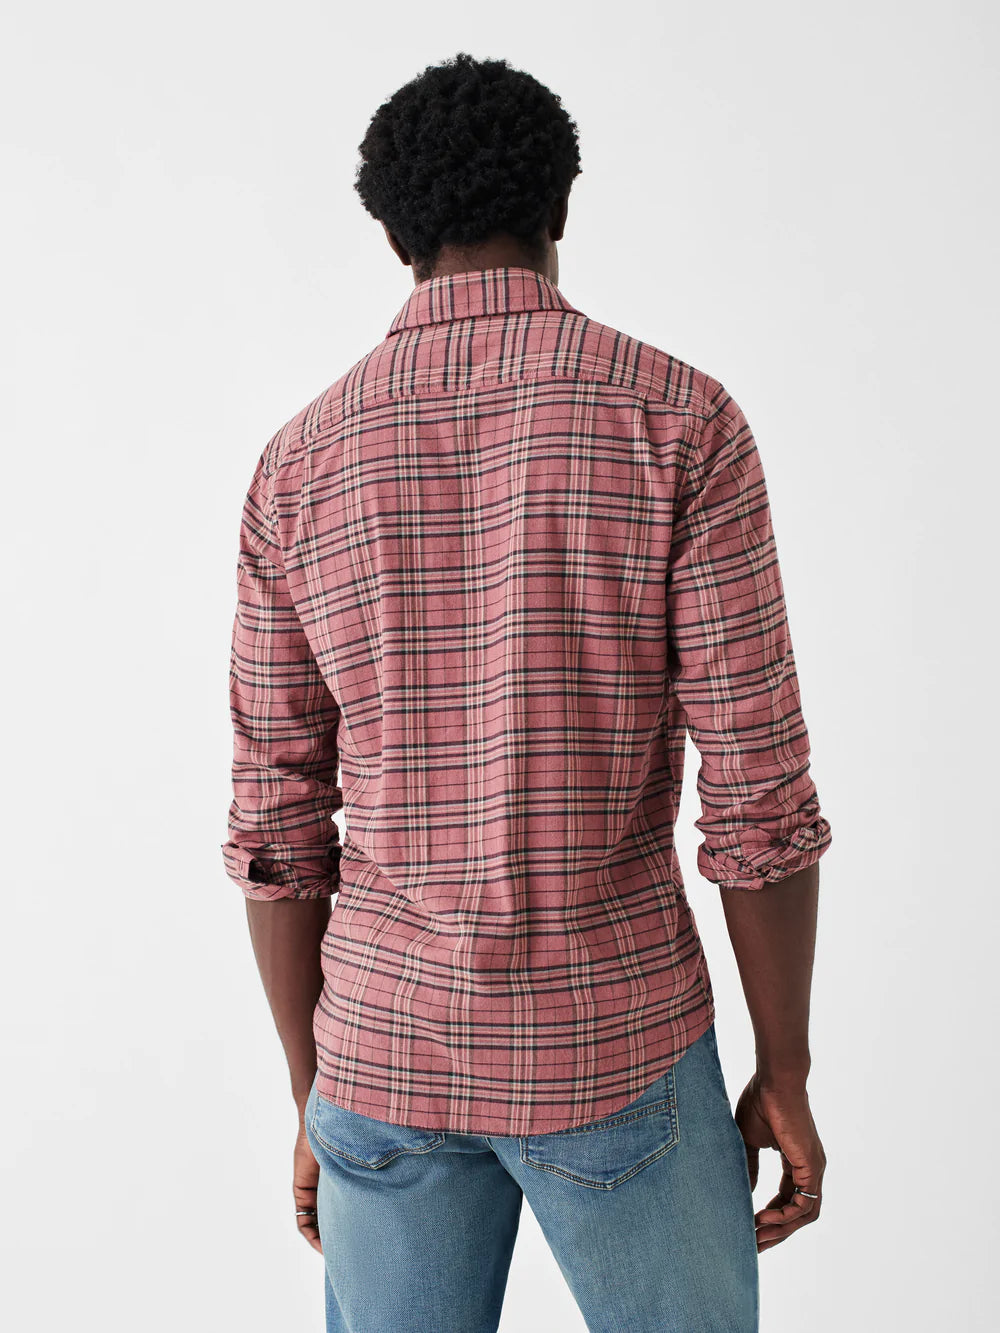 MOVEMENT FLANNEL - MOUNTAIN VIEW PLAID